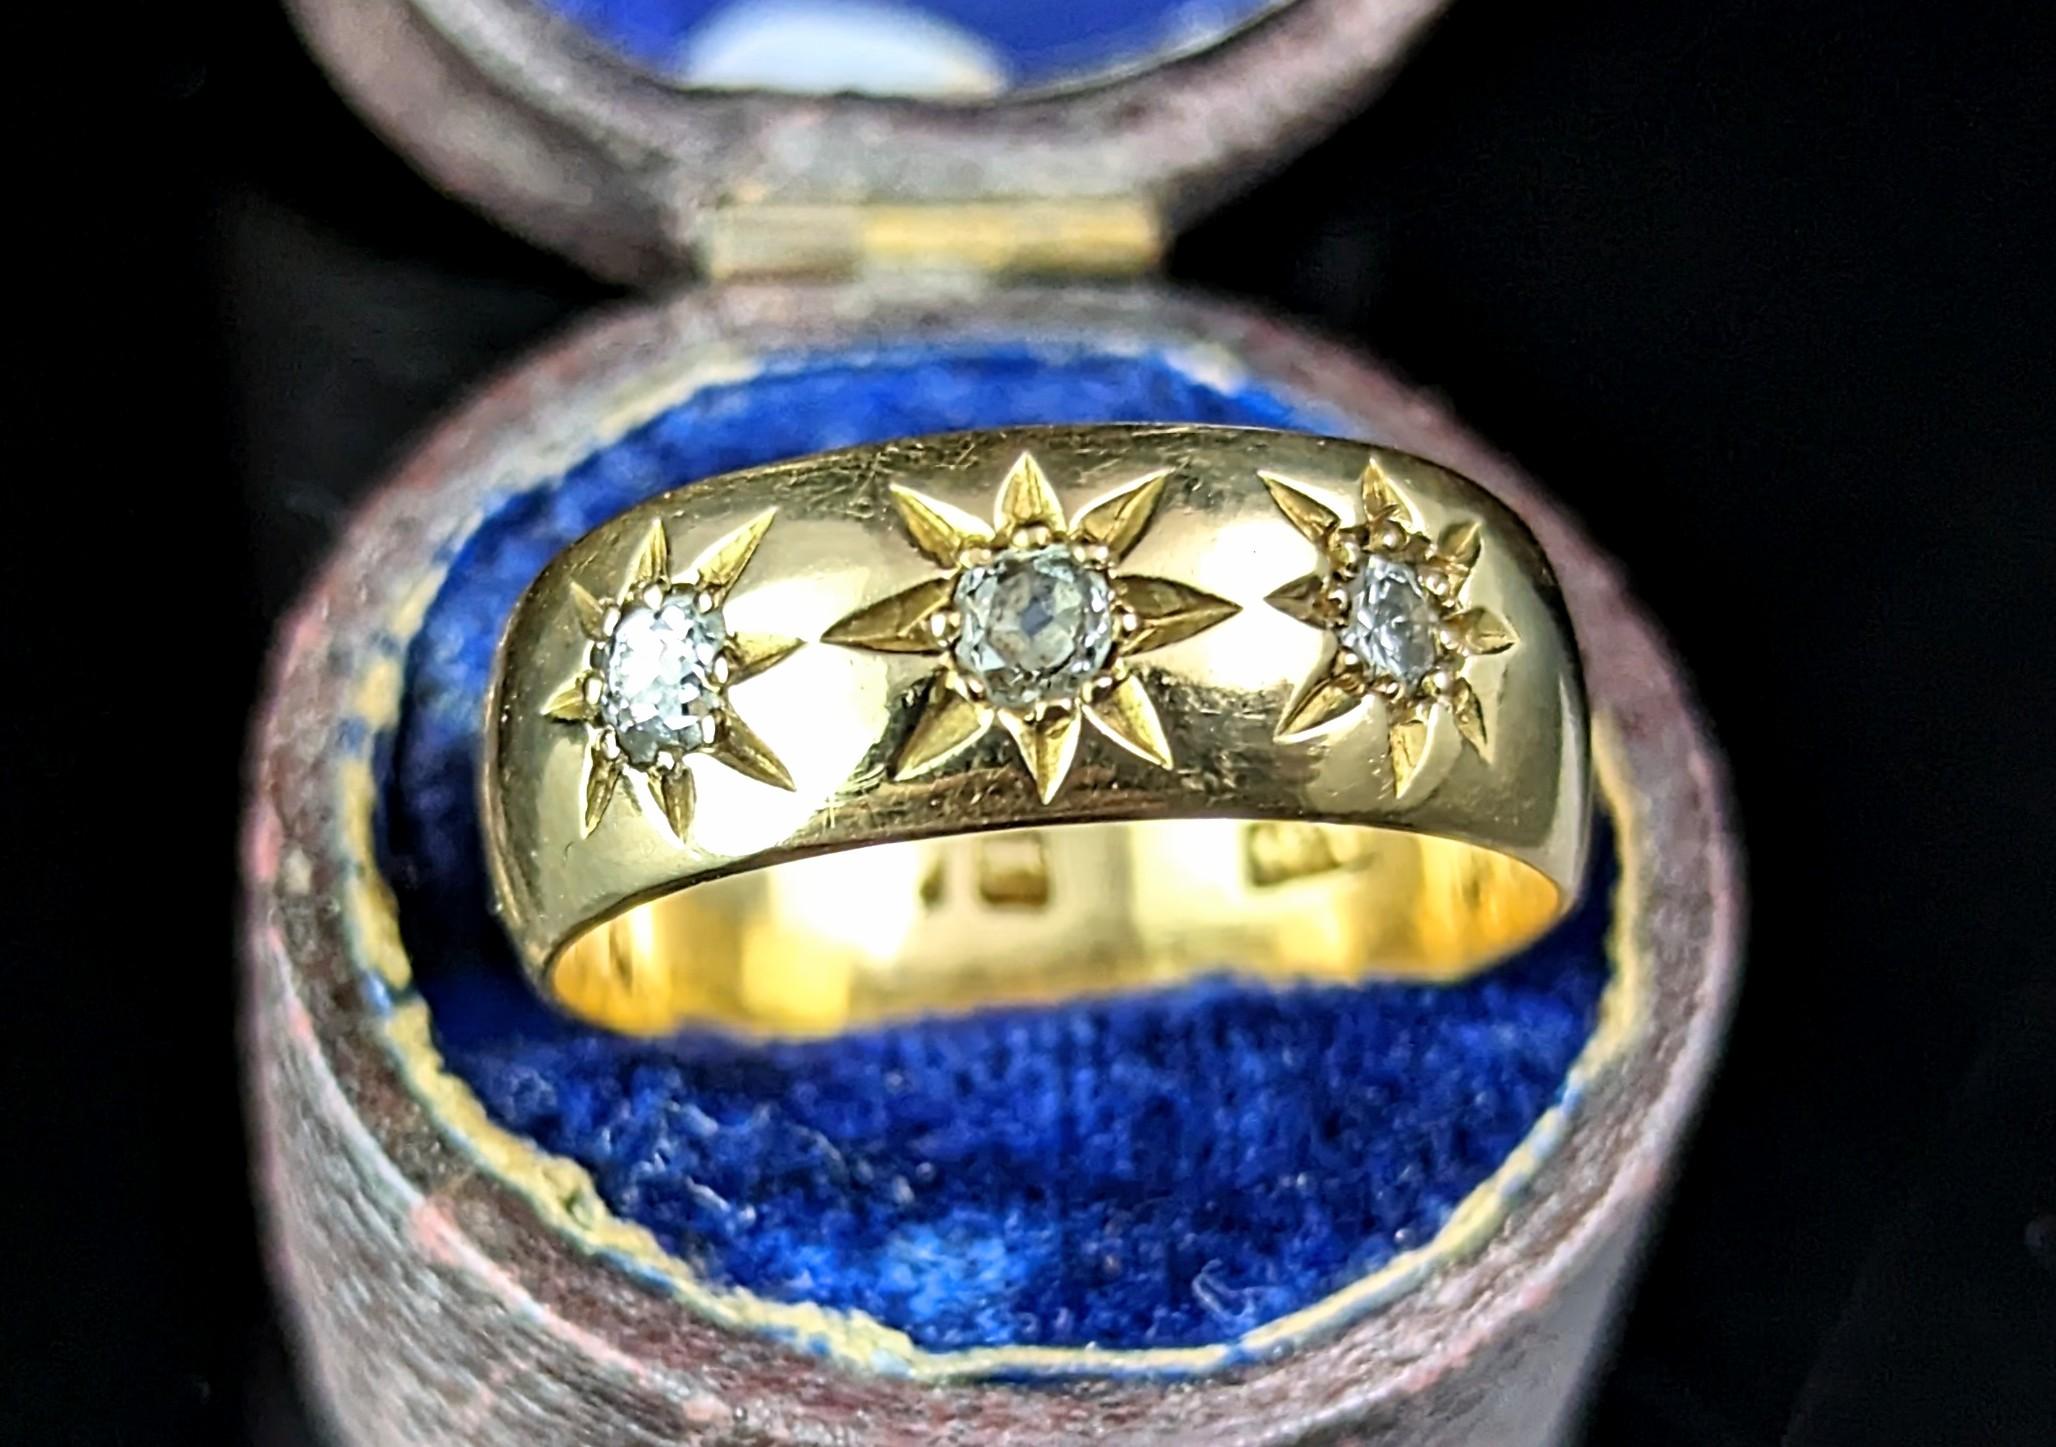 You can't help but fall in love with this beautiful antique Star set diamond ring.

Set in rich buttery 18ct gold, this design is also known as a lucky star ring due to the star shaped settings, the iconic design also giving it a lovely celestial